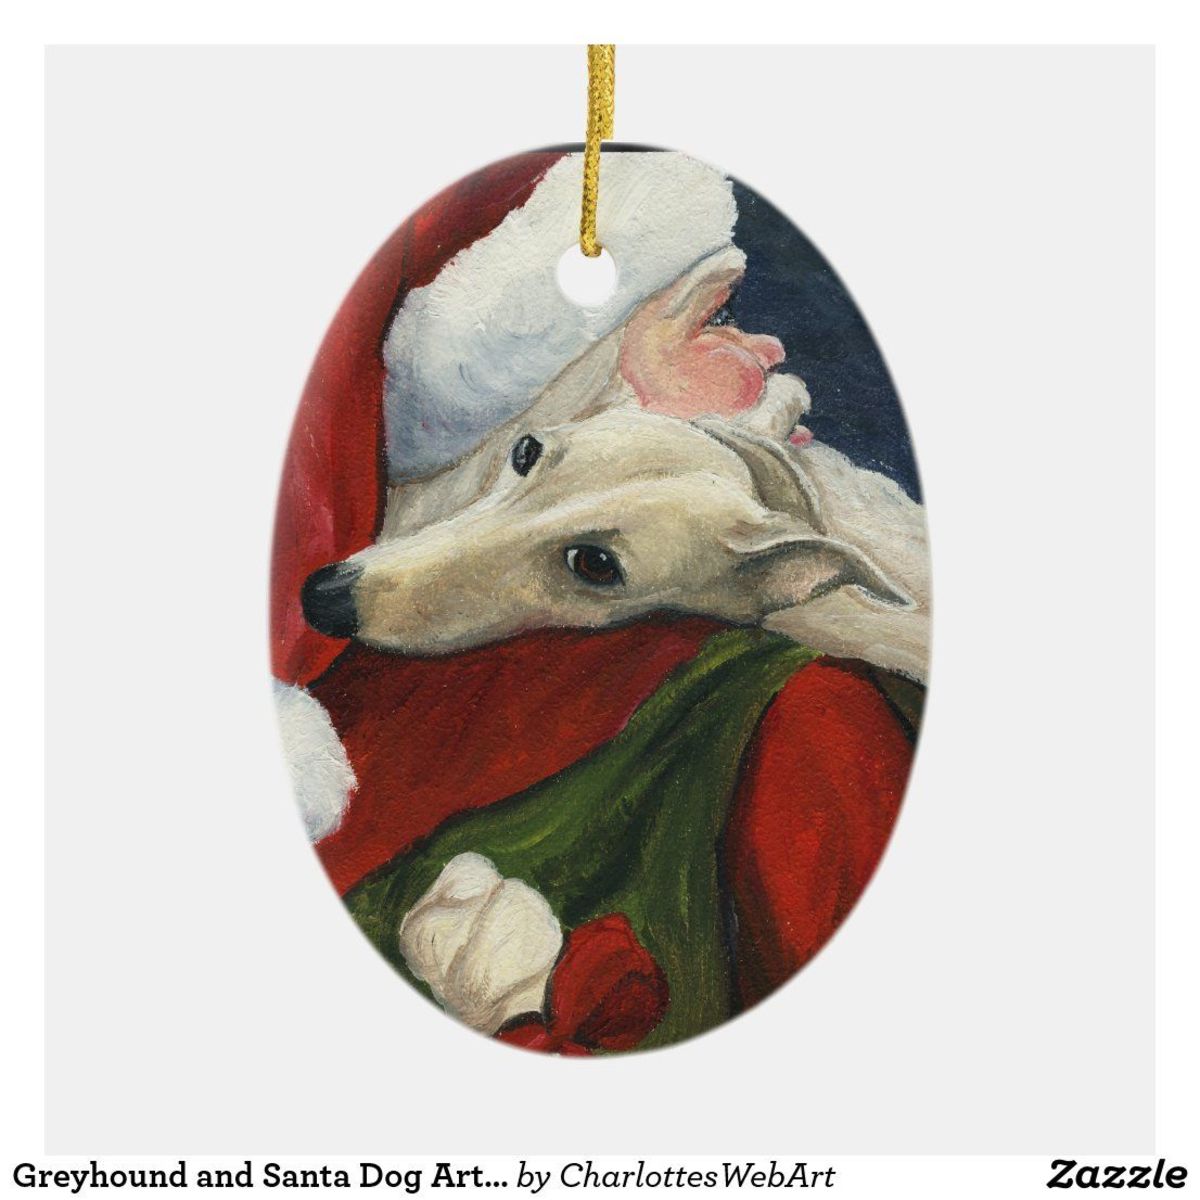 The Greyhound breed is long and lean and muscular.  This is a beautiful Christmas ornament for a Greyhound owner.